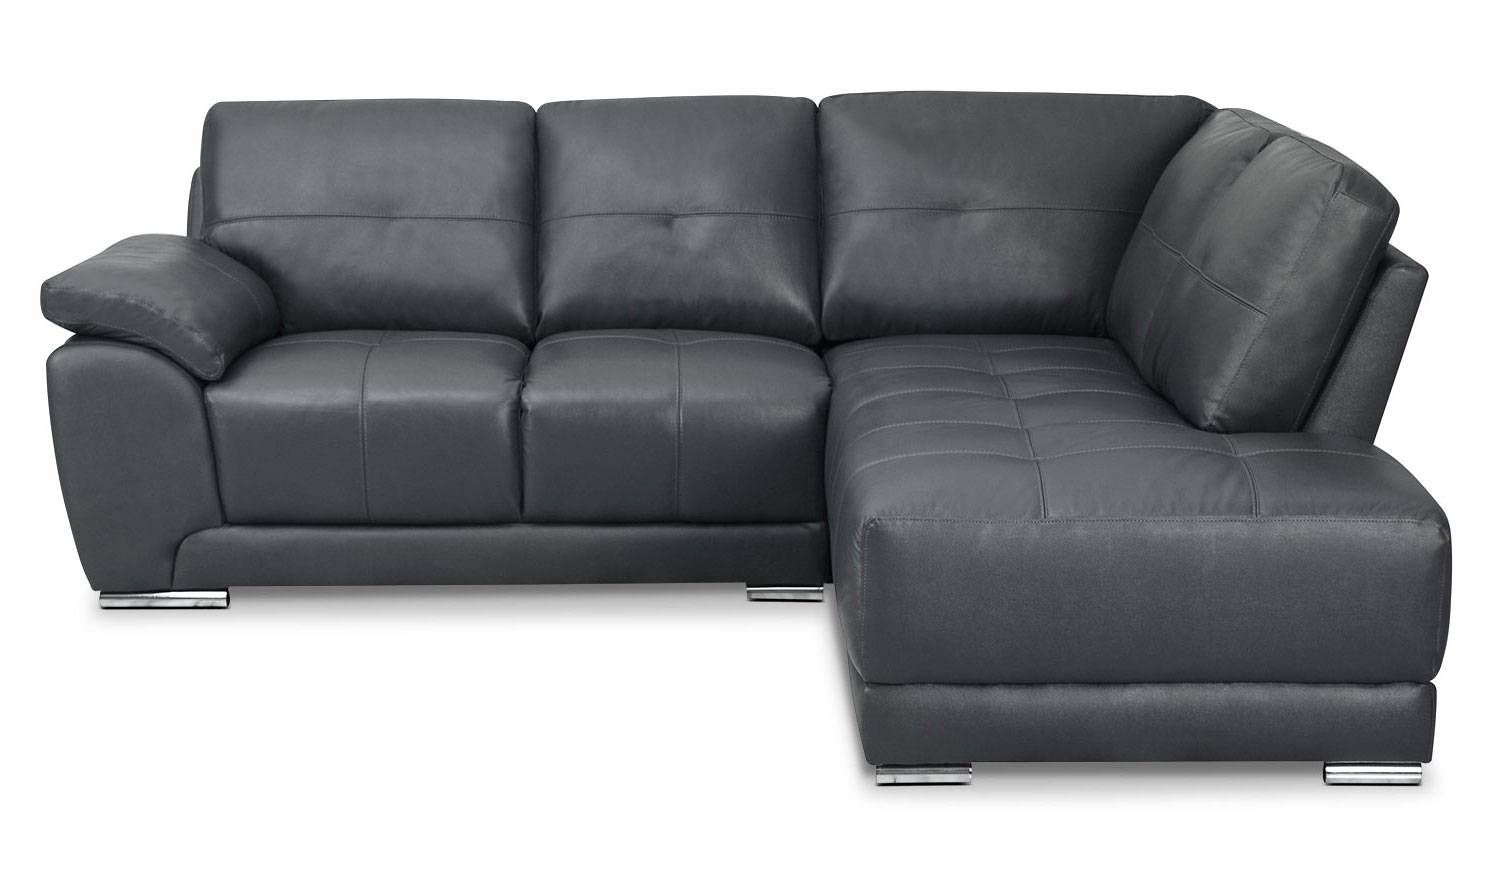 Sectionals | The Brick Within Narrow Sectional Sofas (View 11 of 15)